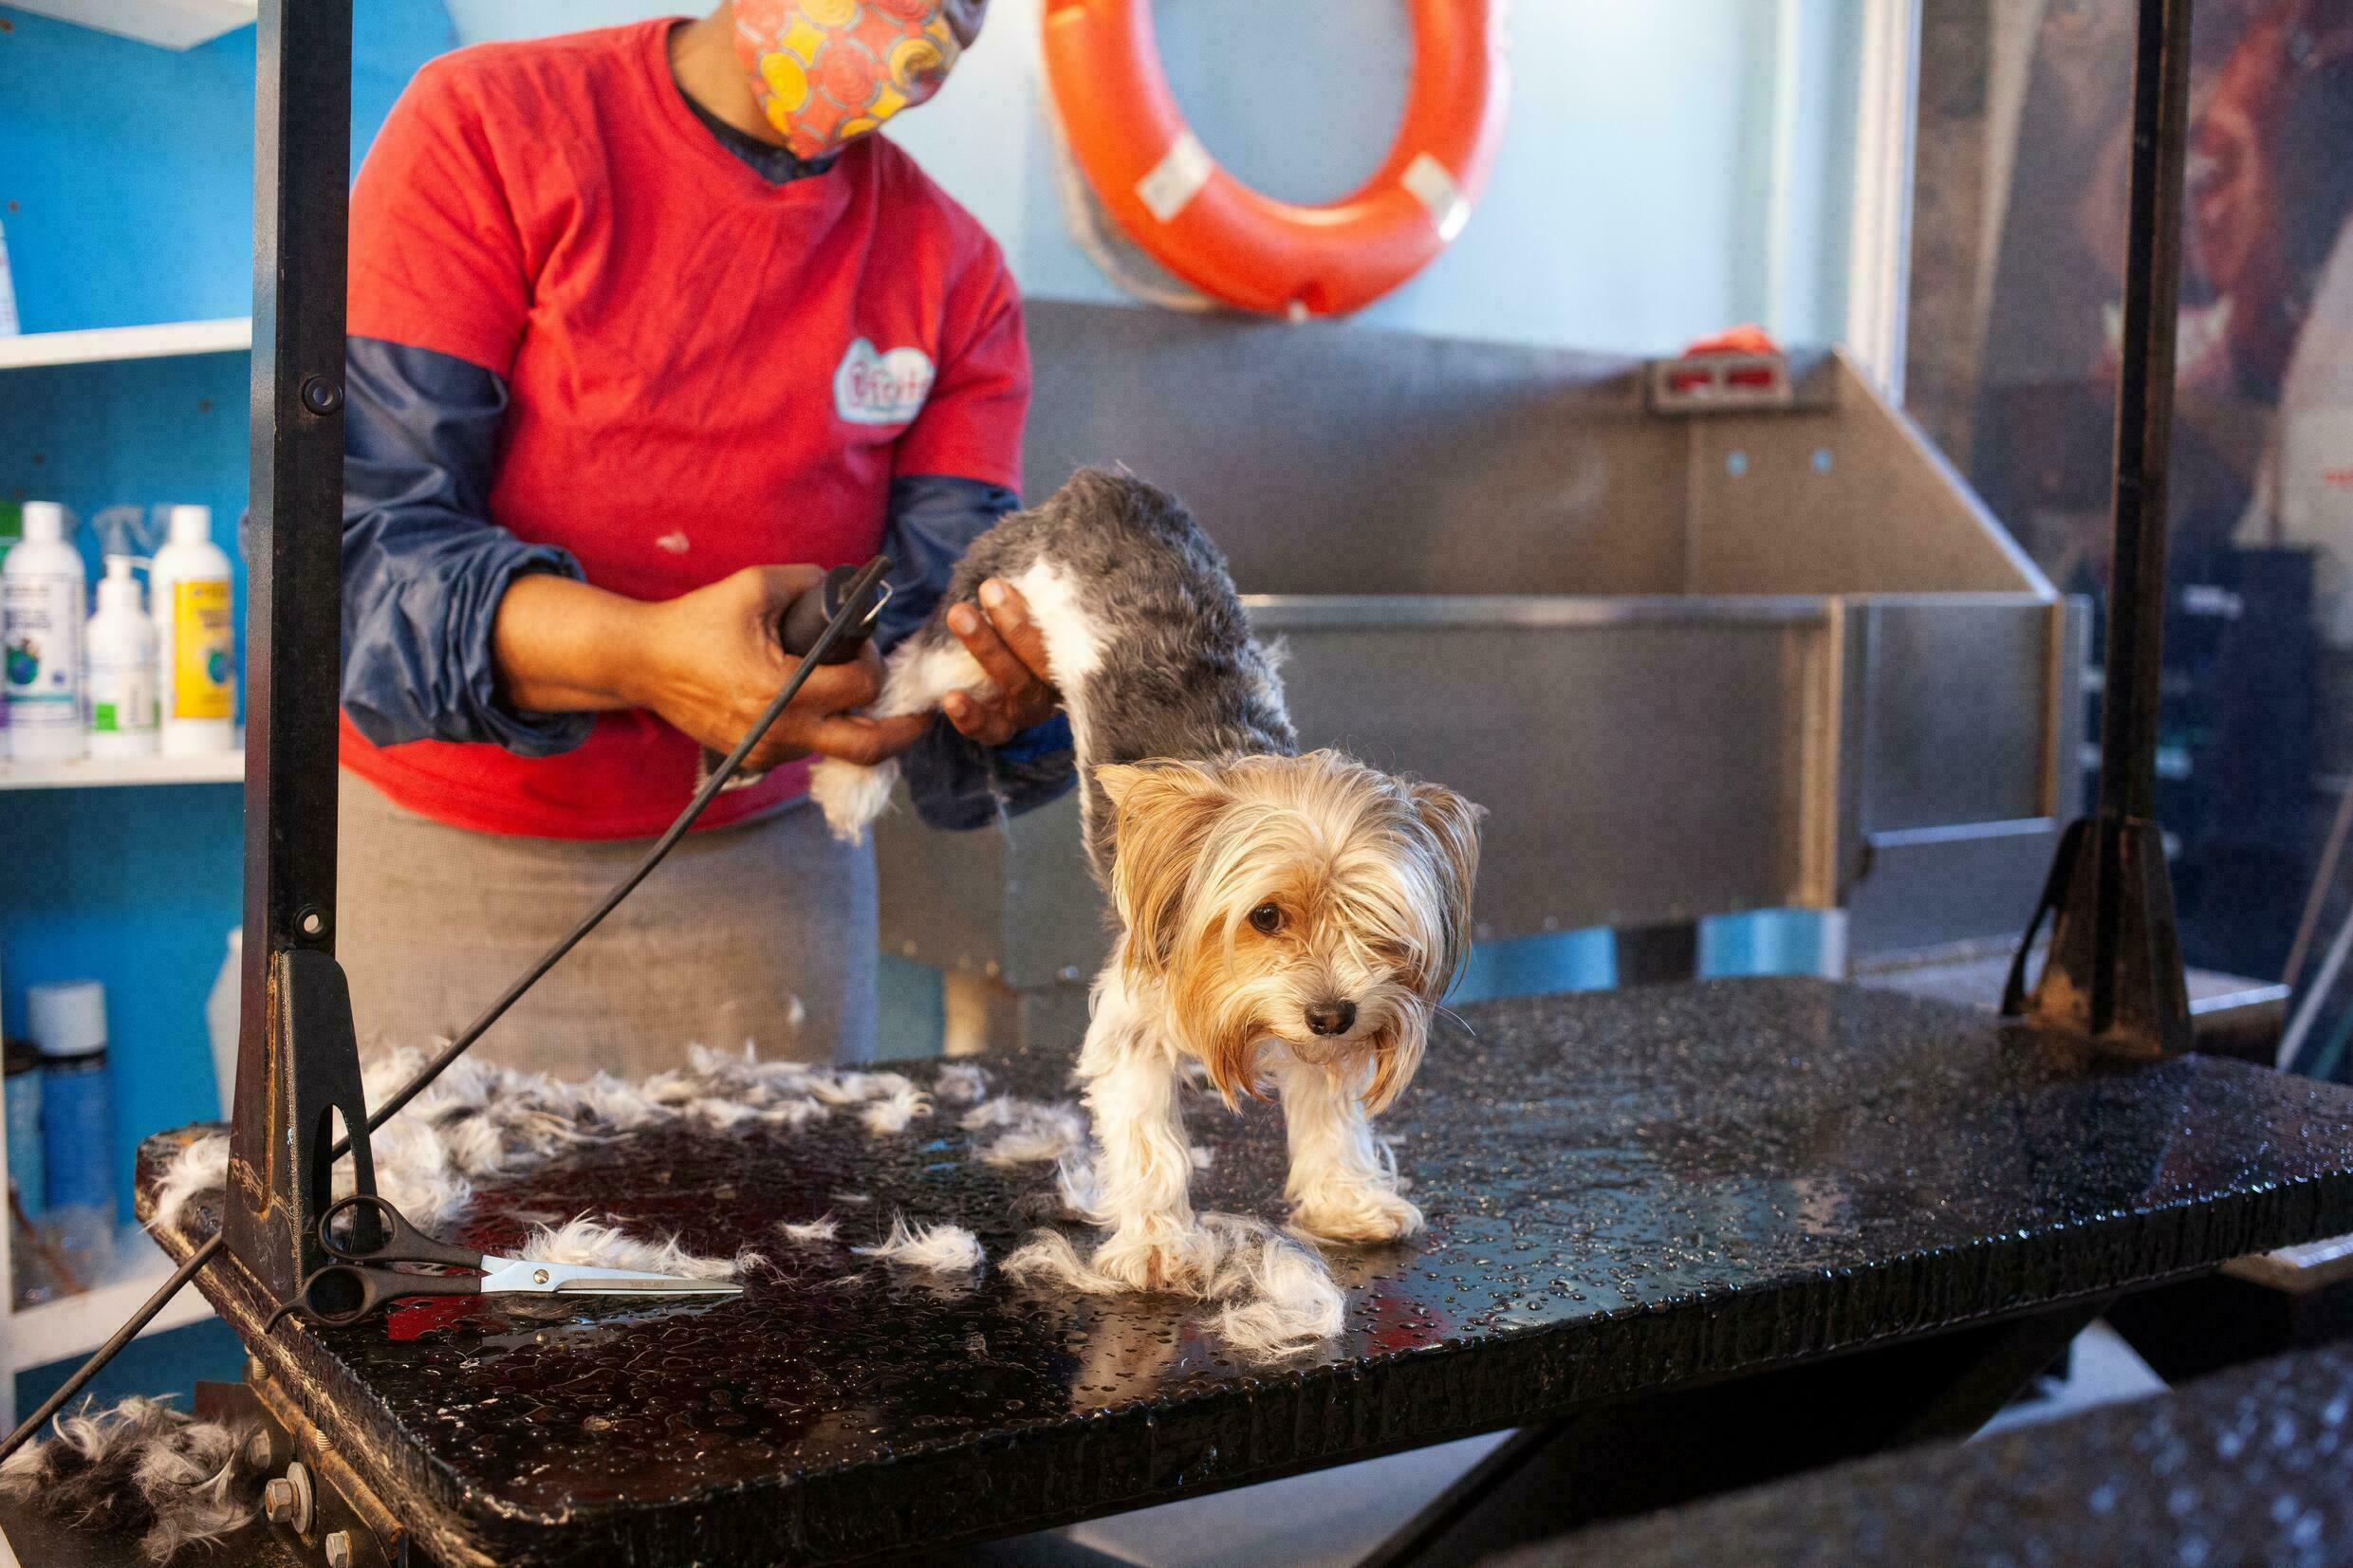 An employee shaves a dog in the grooming room at @Frits, a dog hotel, in Cape Town on December 14, 2021. Photo: AFP